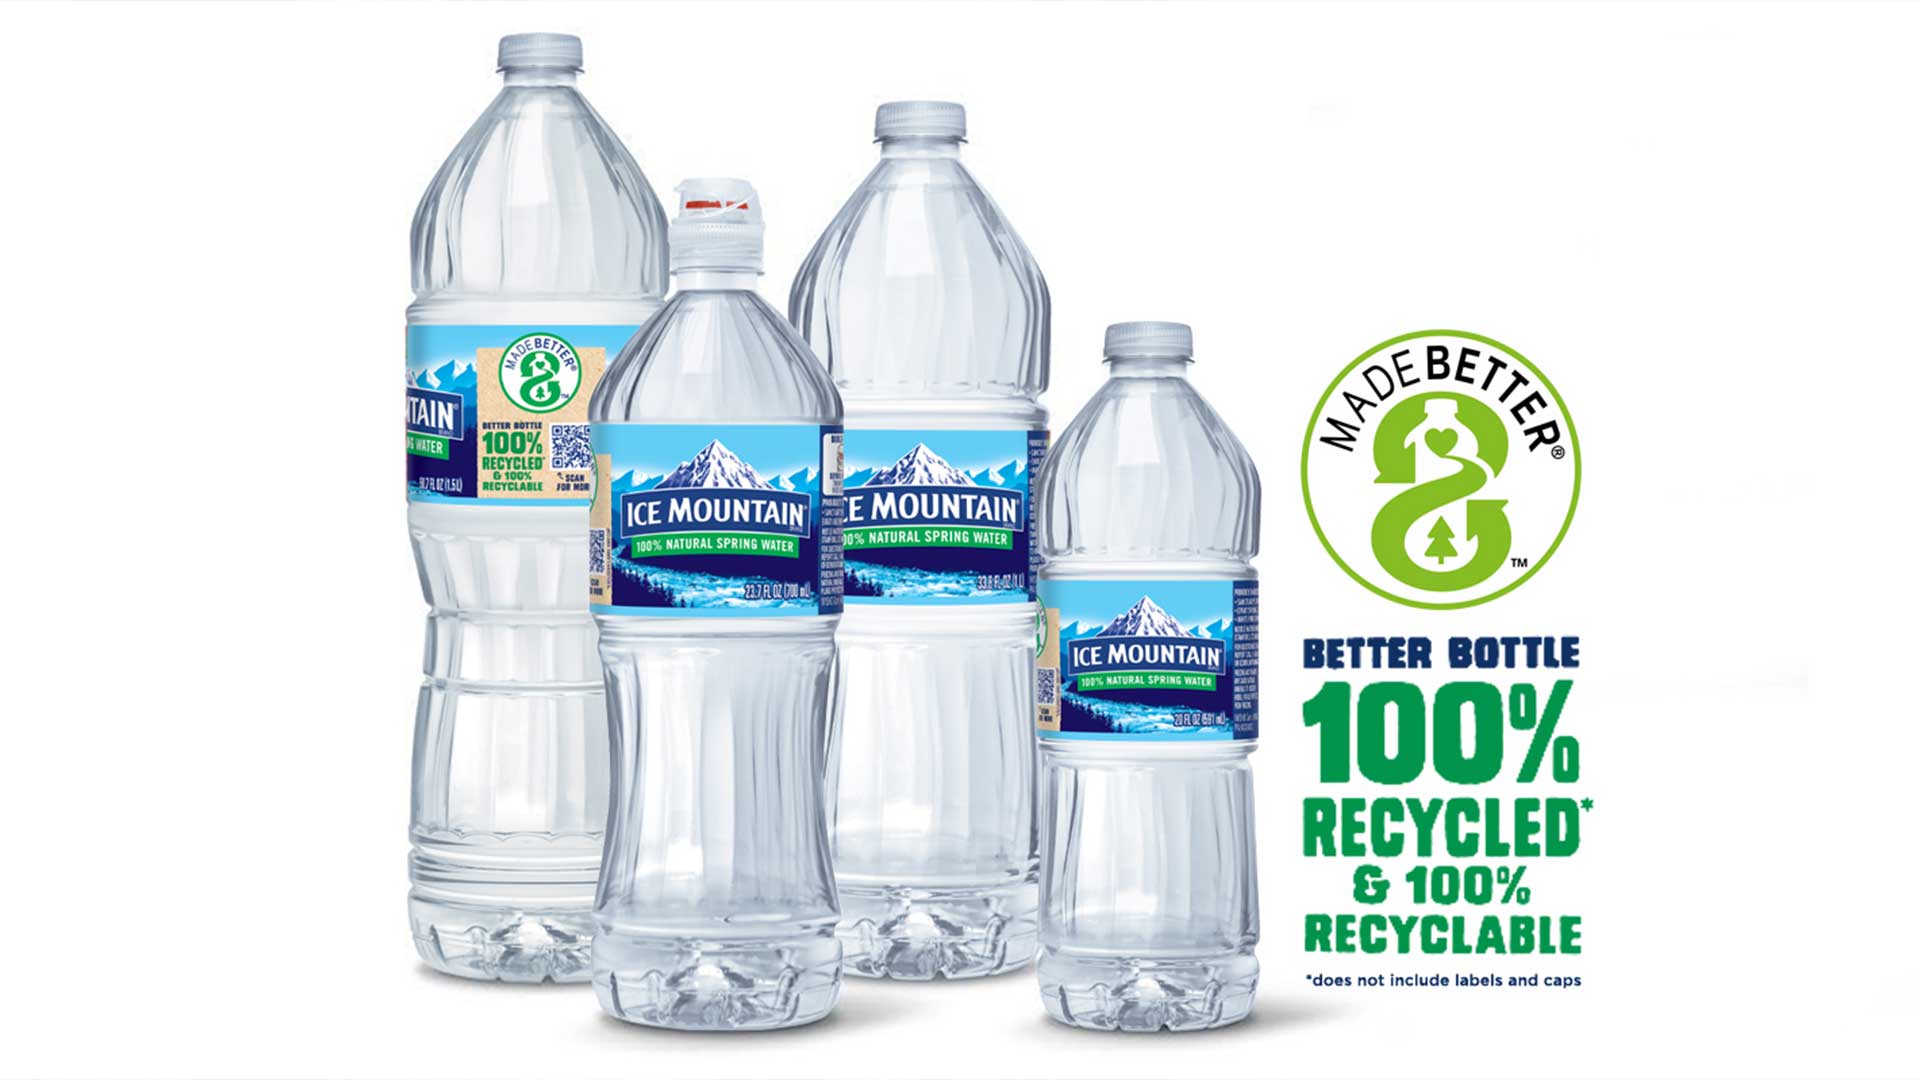 https://www.multivu.com/players/English/8895151-poland-spring-water-made-for-a-better-tomorrow-recycling-campaign/image/productlineupv3_1620680782846-HR.jpg